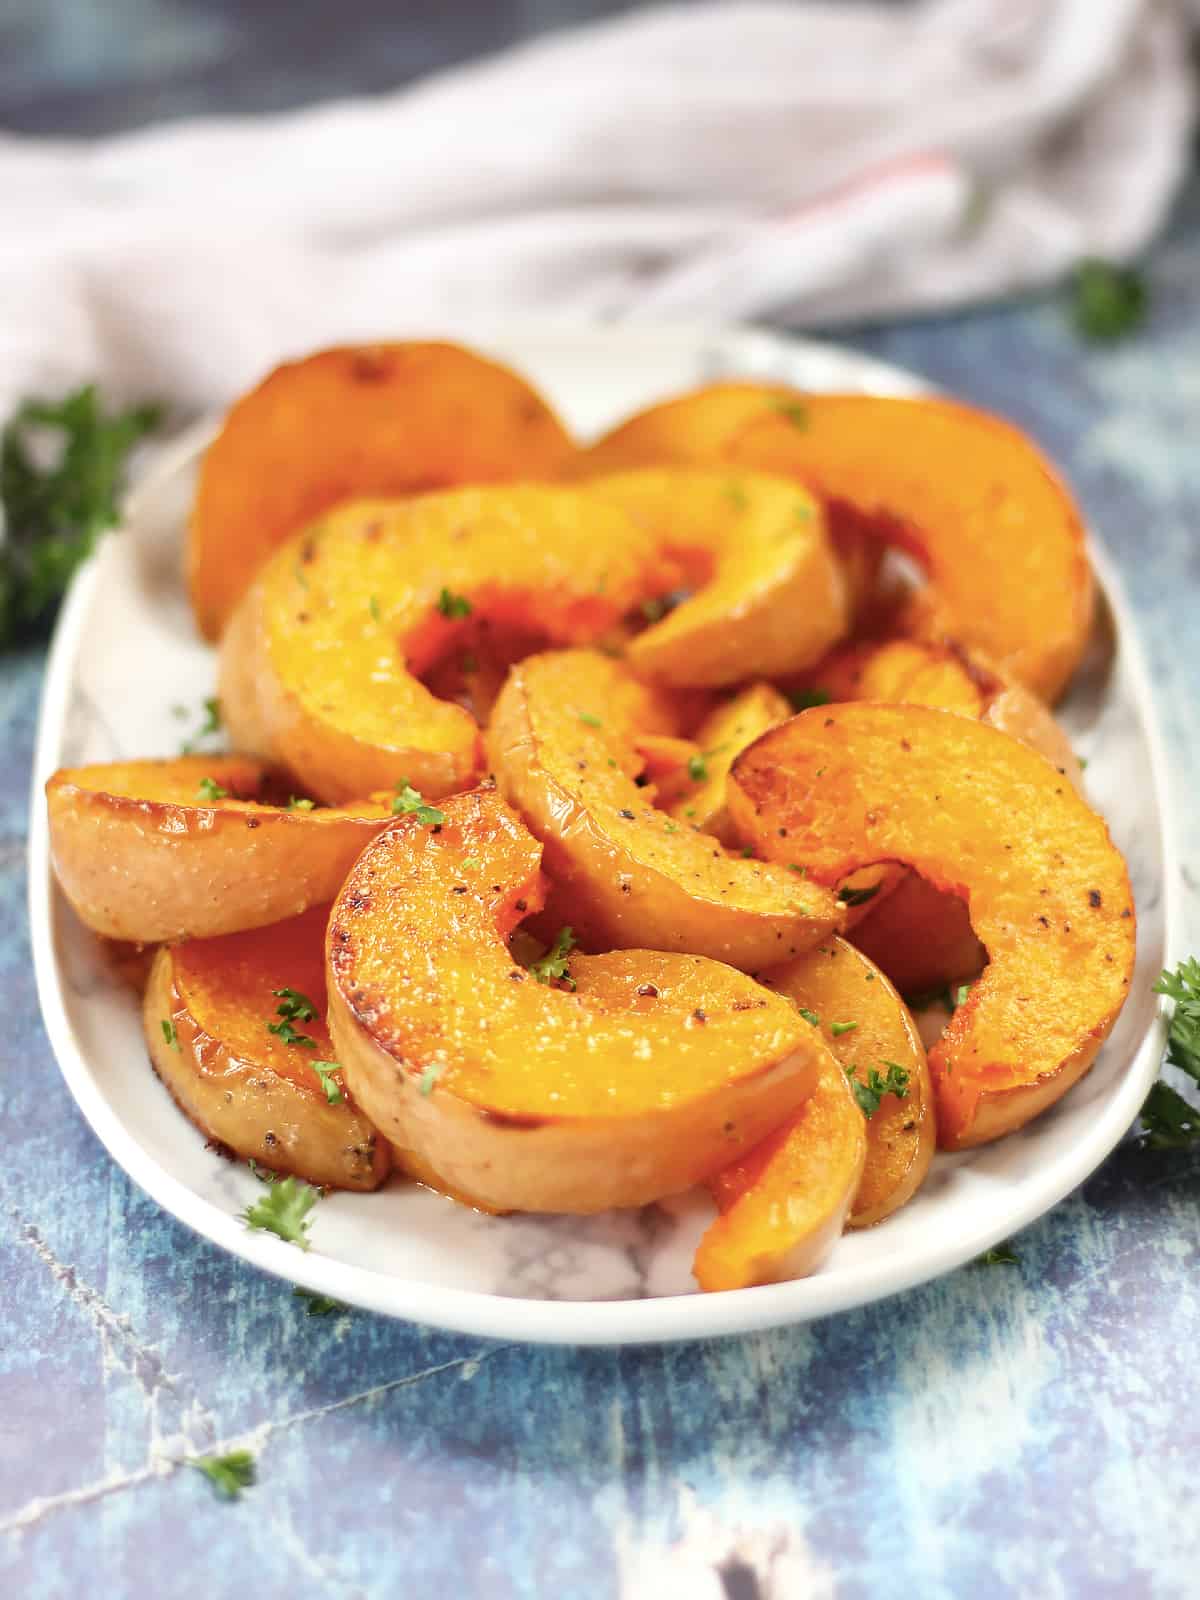 Wedges of roasted butterkin squash on a serving plate.